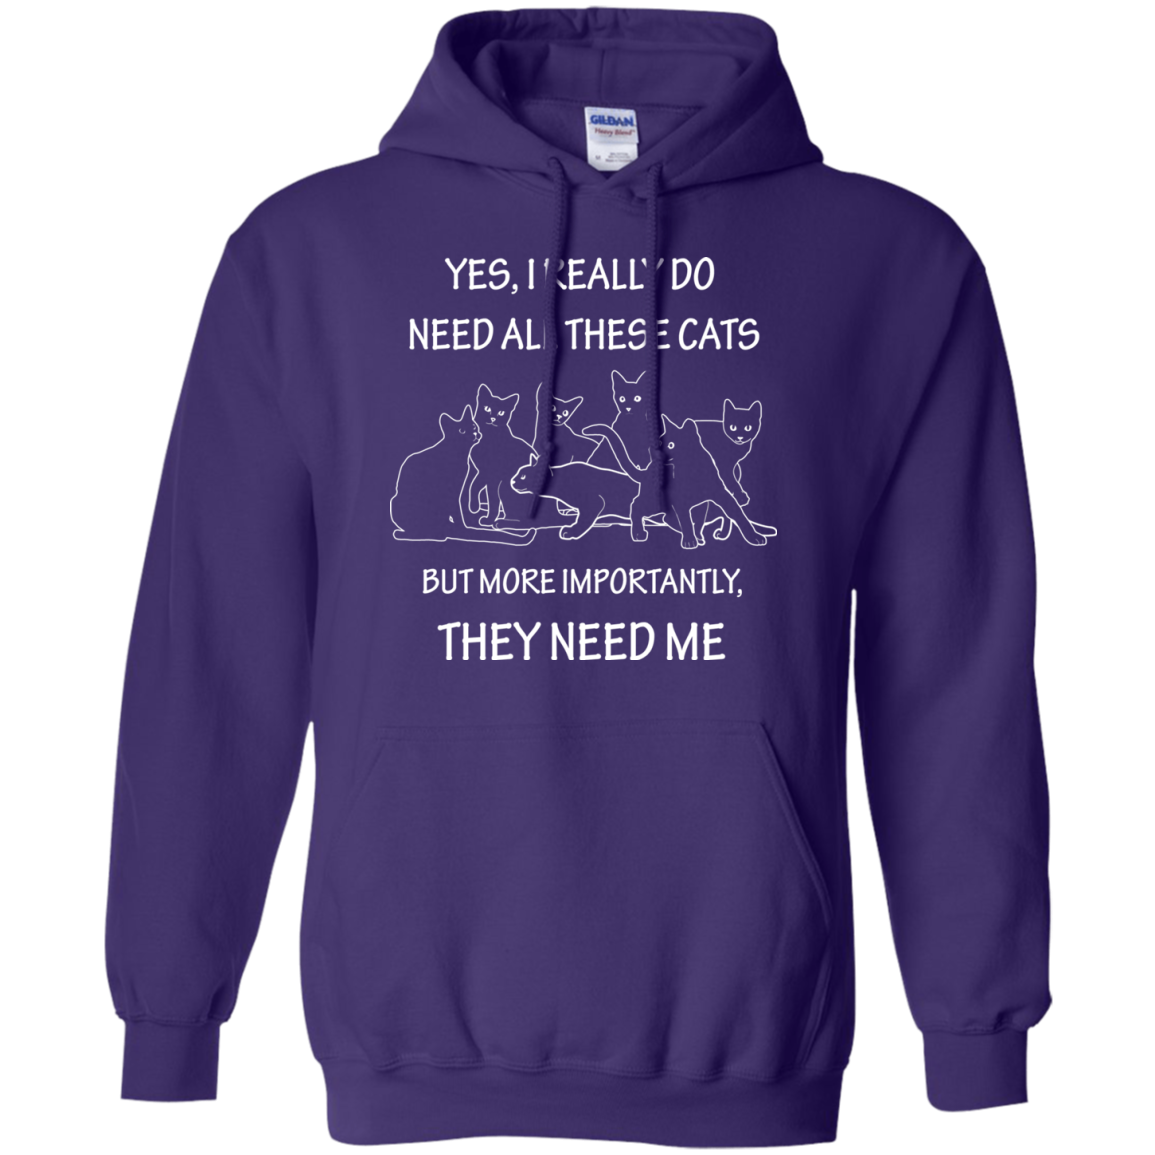 They Need Me Pullover Hoodie